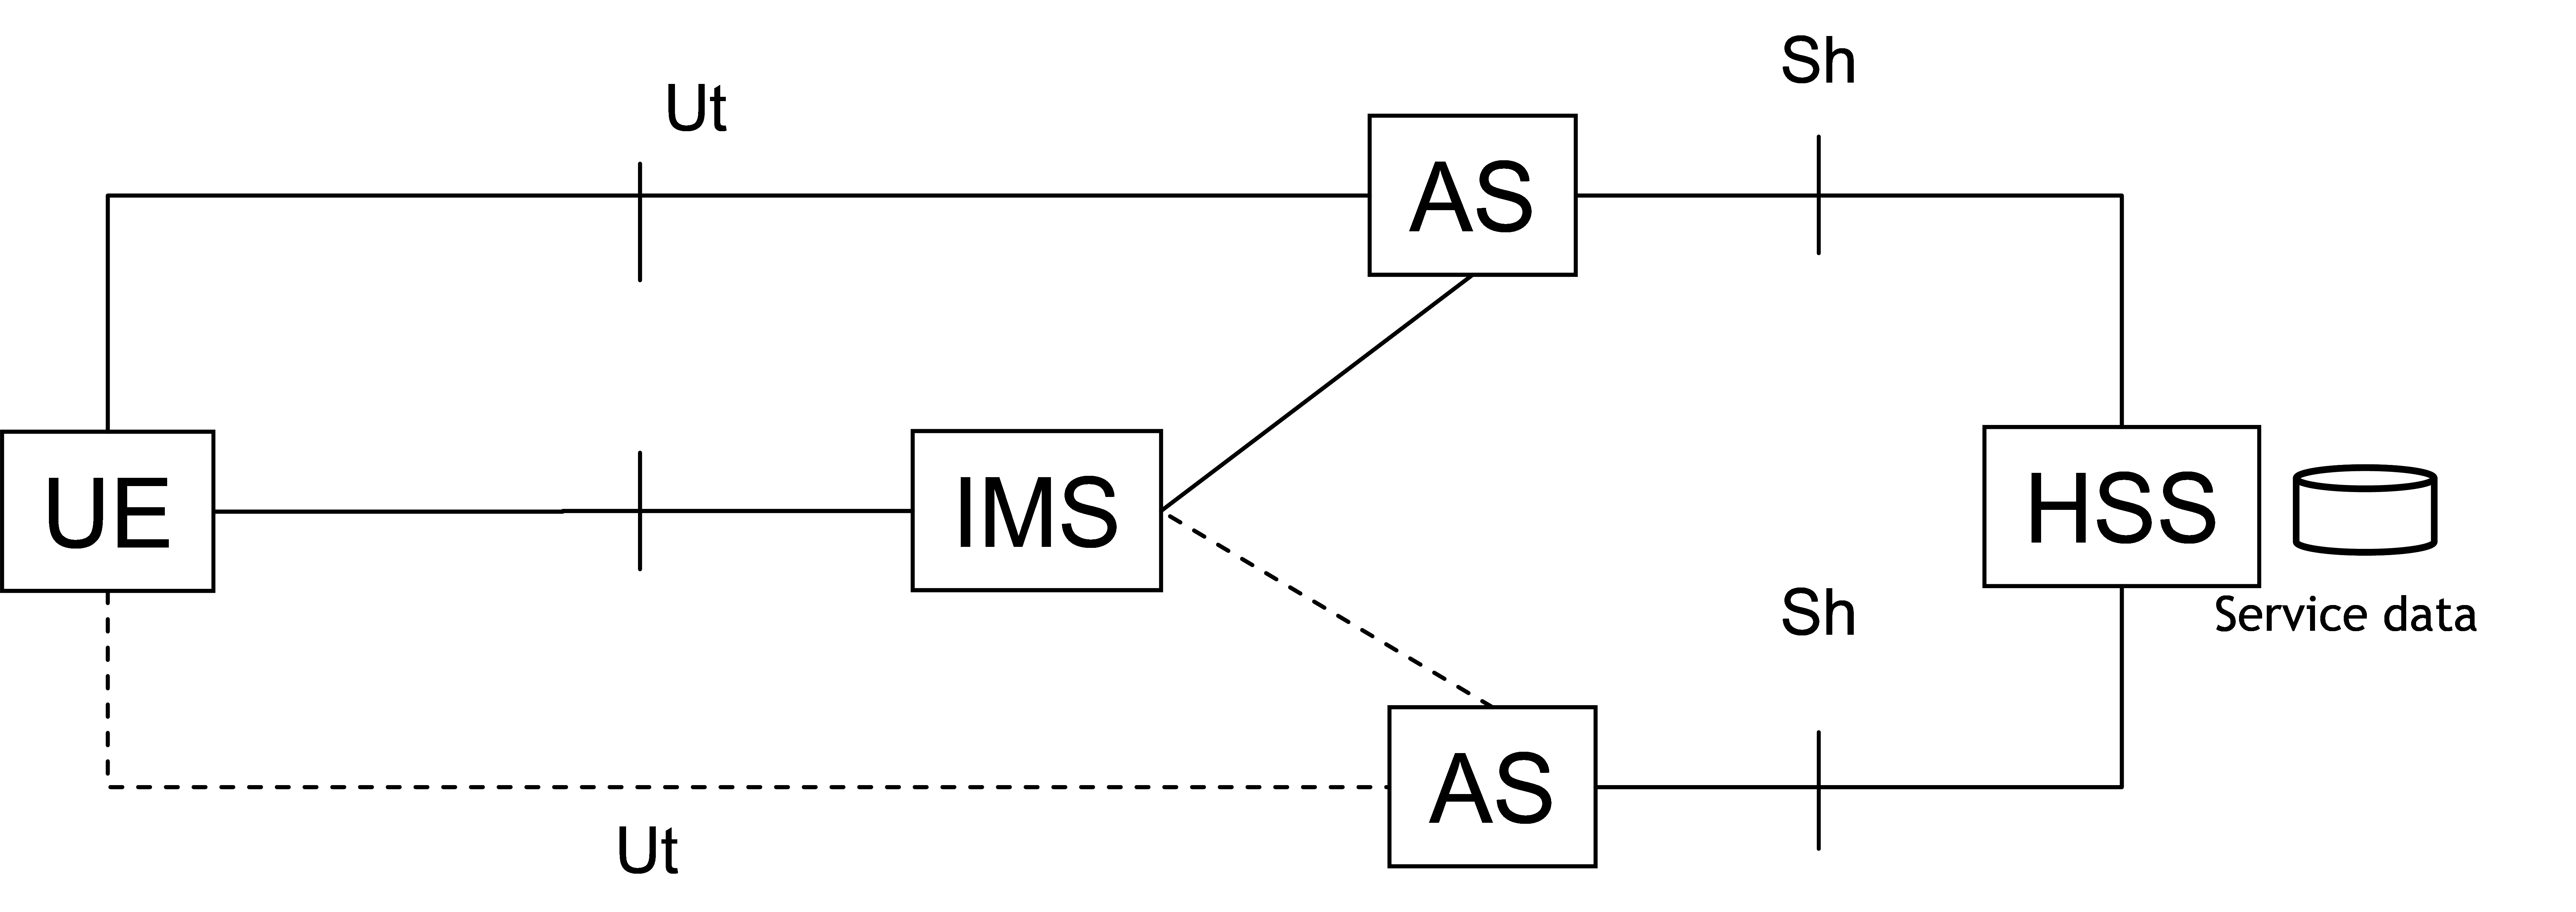 Figure 5-1: Functional architecture for AS interoperability